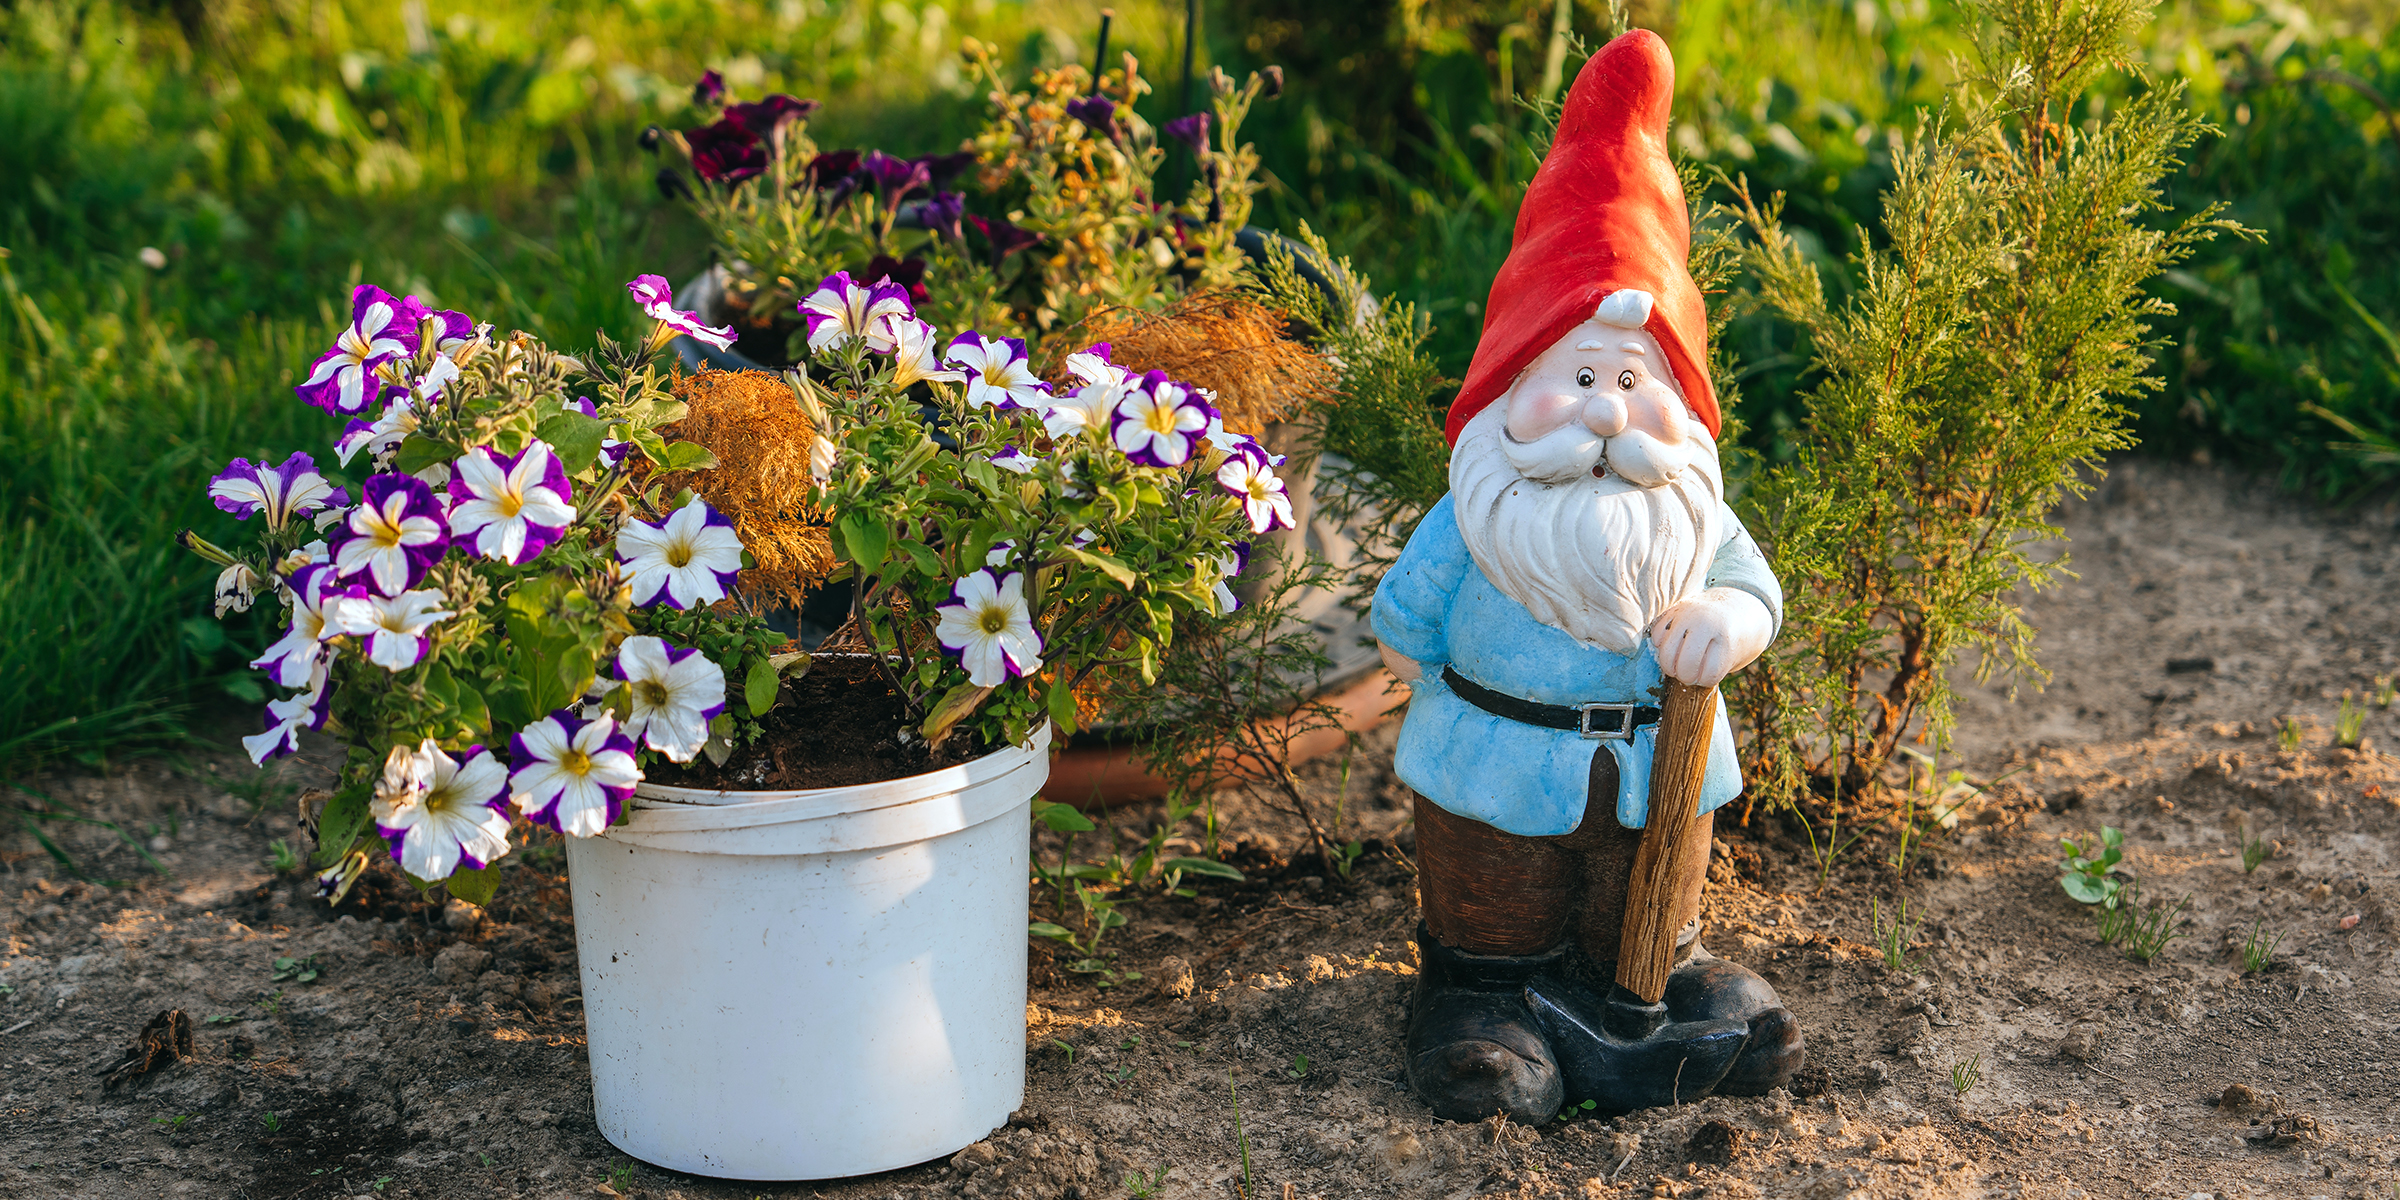 A garden gnome next to some flowers | Source: Shutterstock